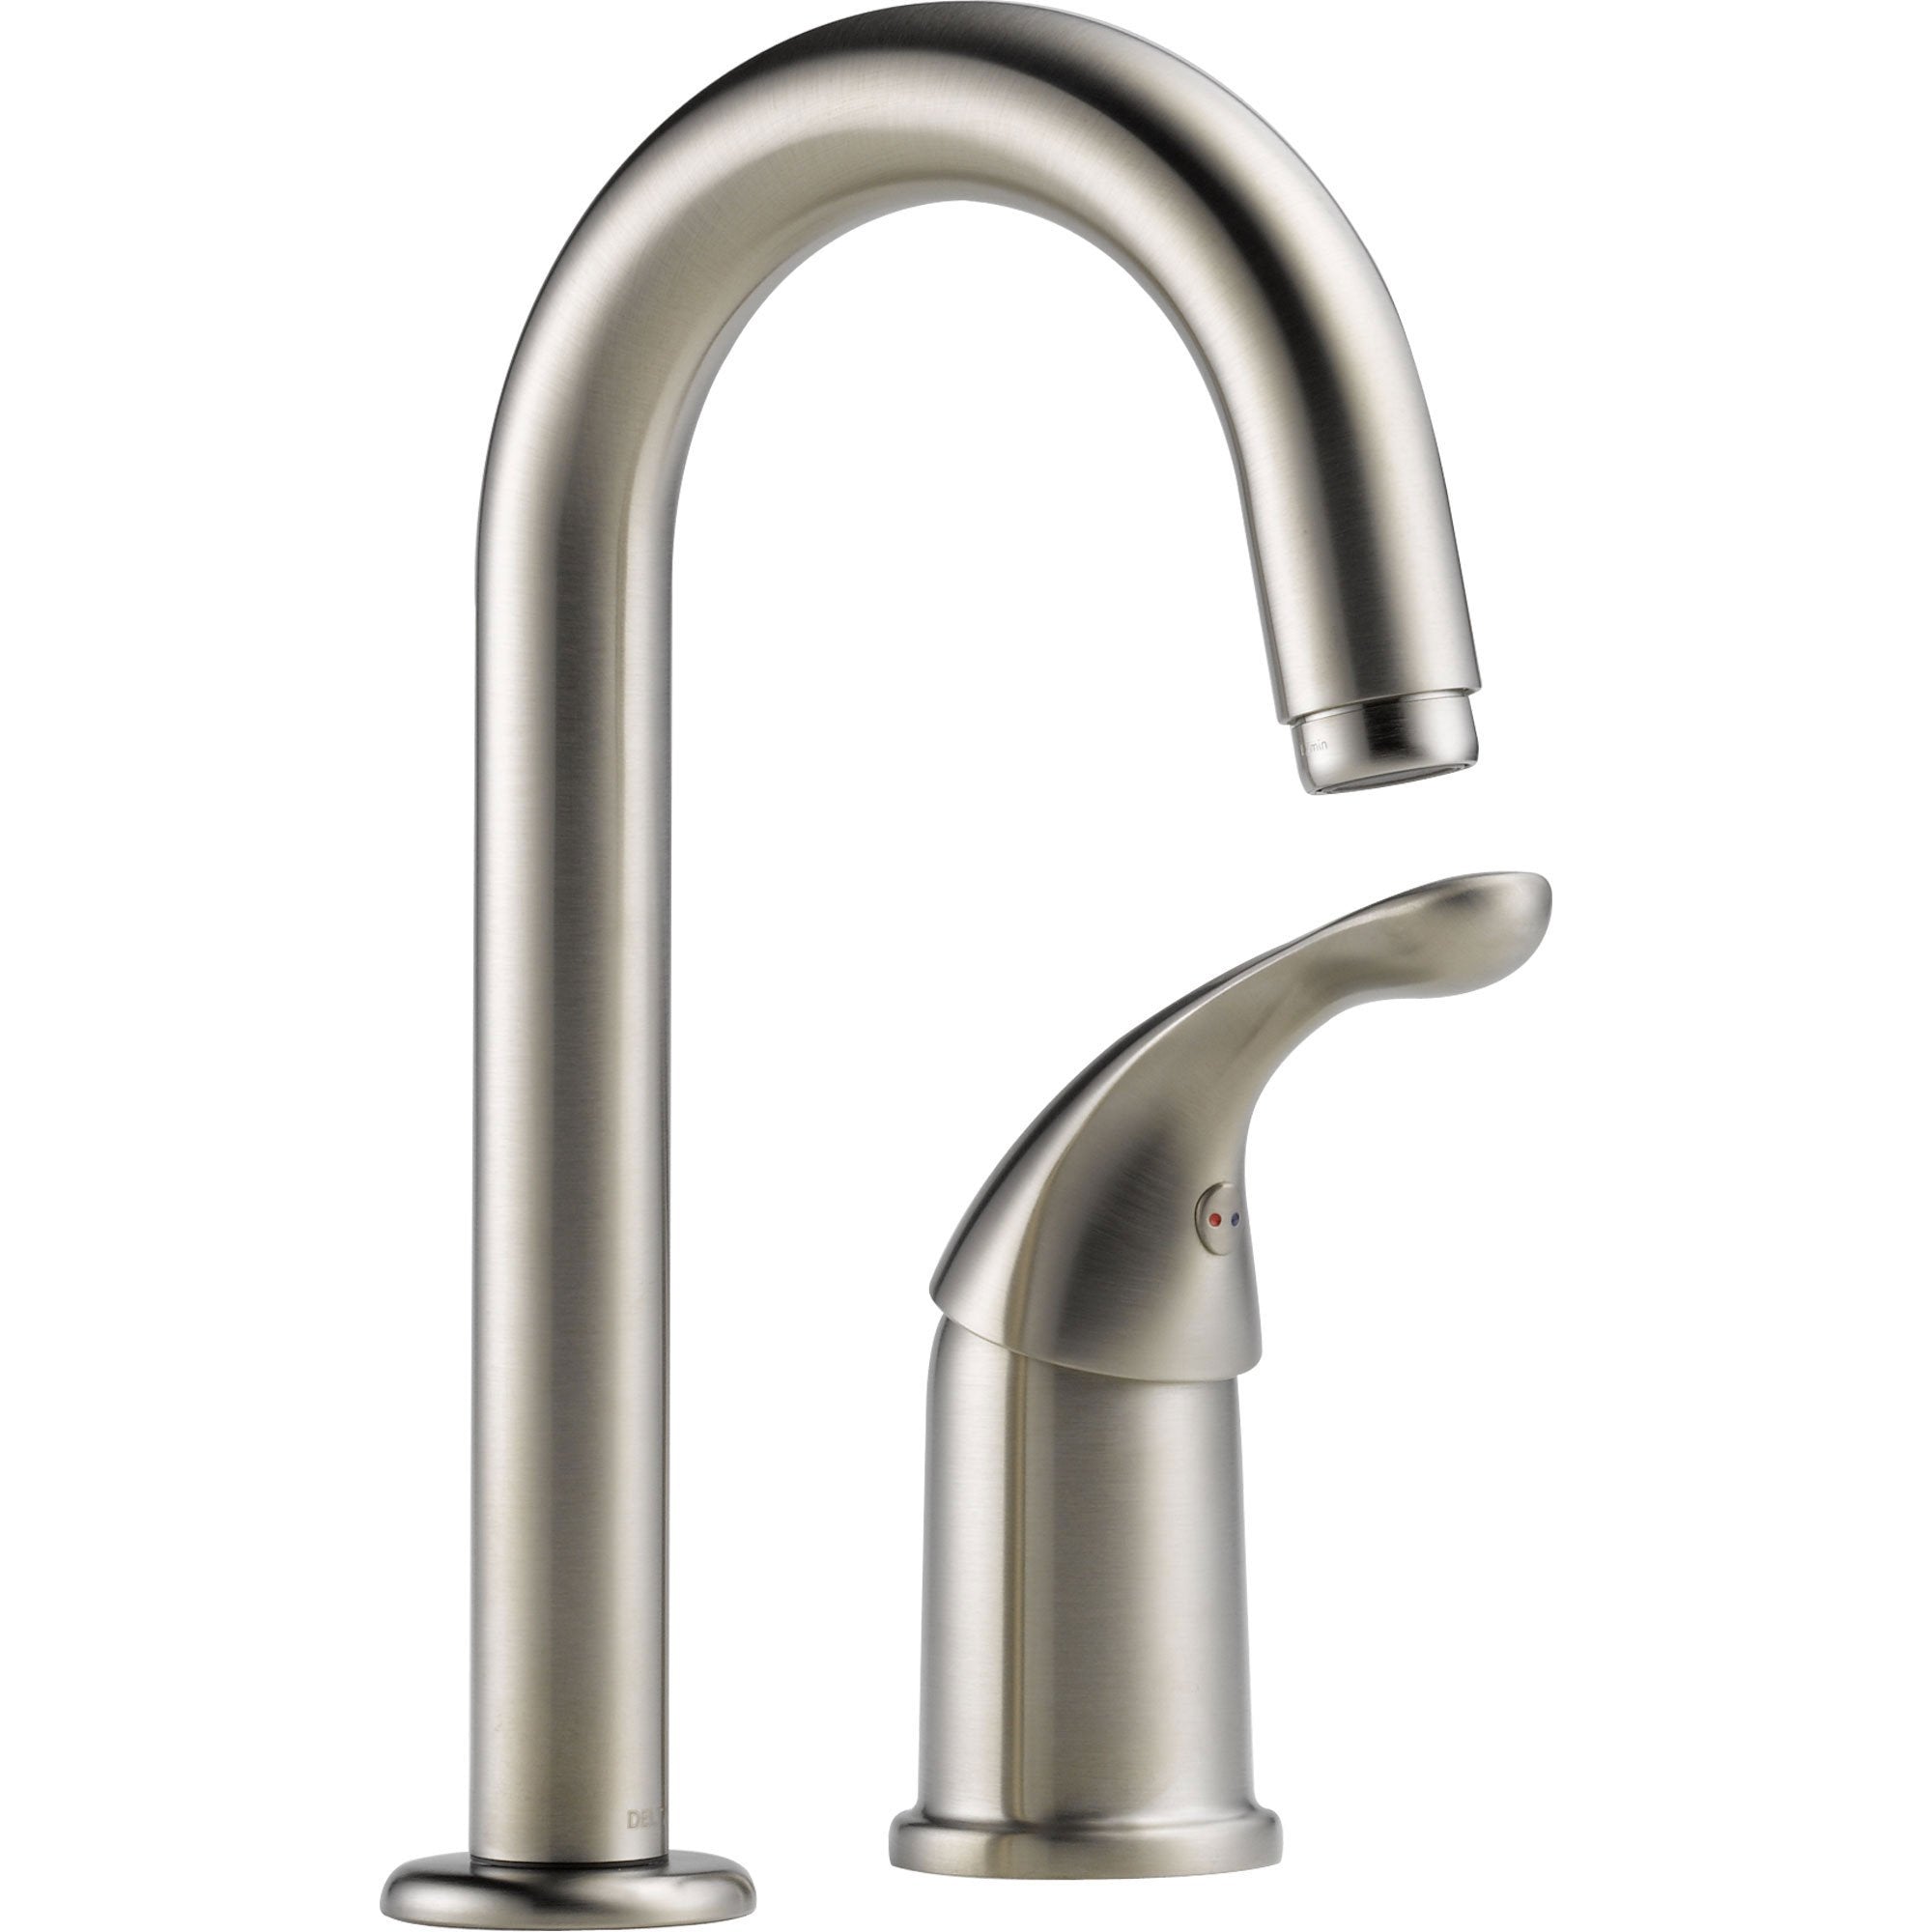 Delta Classic 2 Hole Single Lever Handle Bar Faucet in Stainless Steel 474543